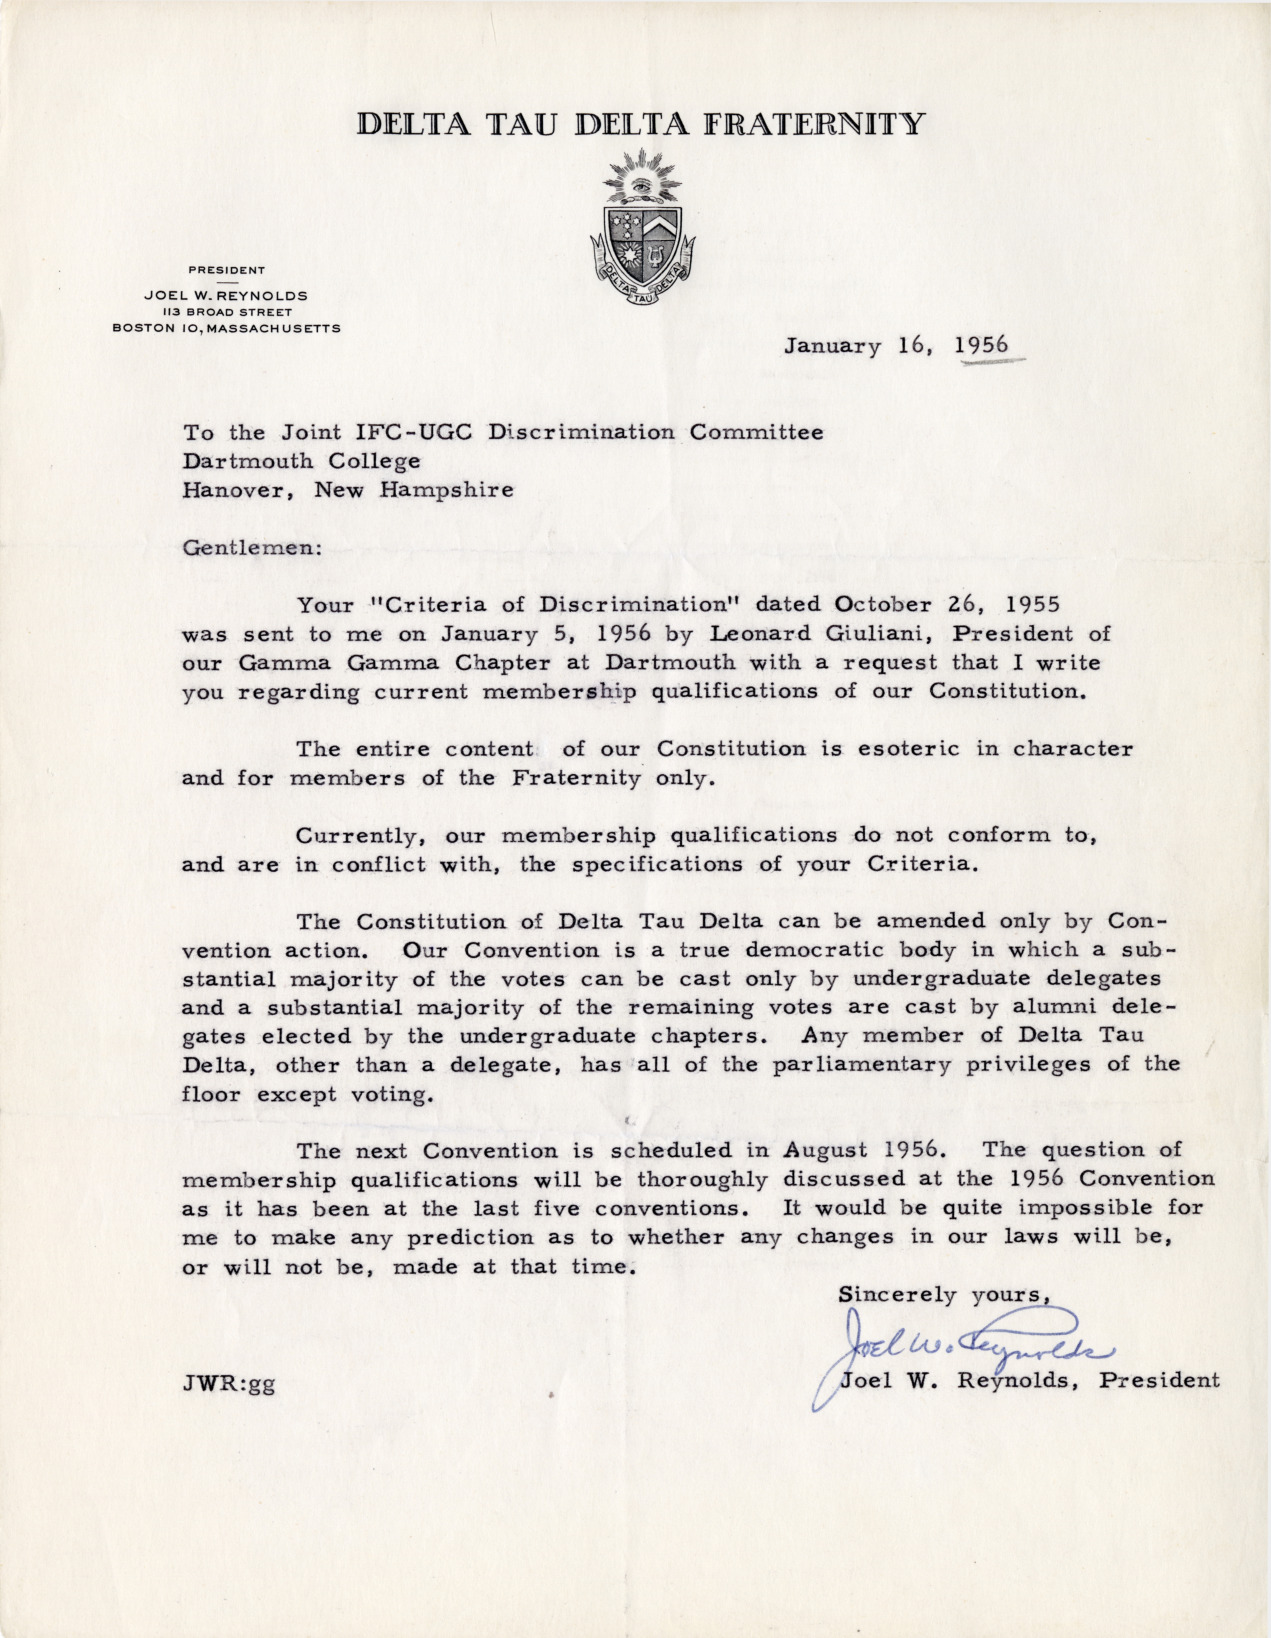 Delta Tau Delta Fails to Meet the Requirements of the 1954 Referendum